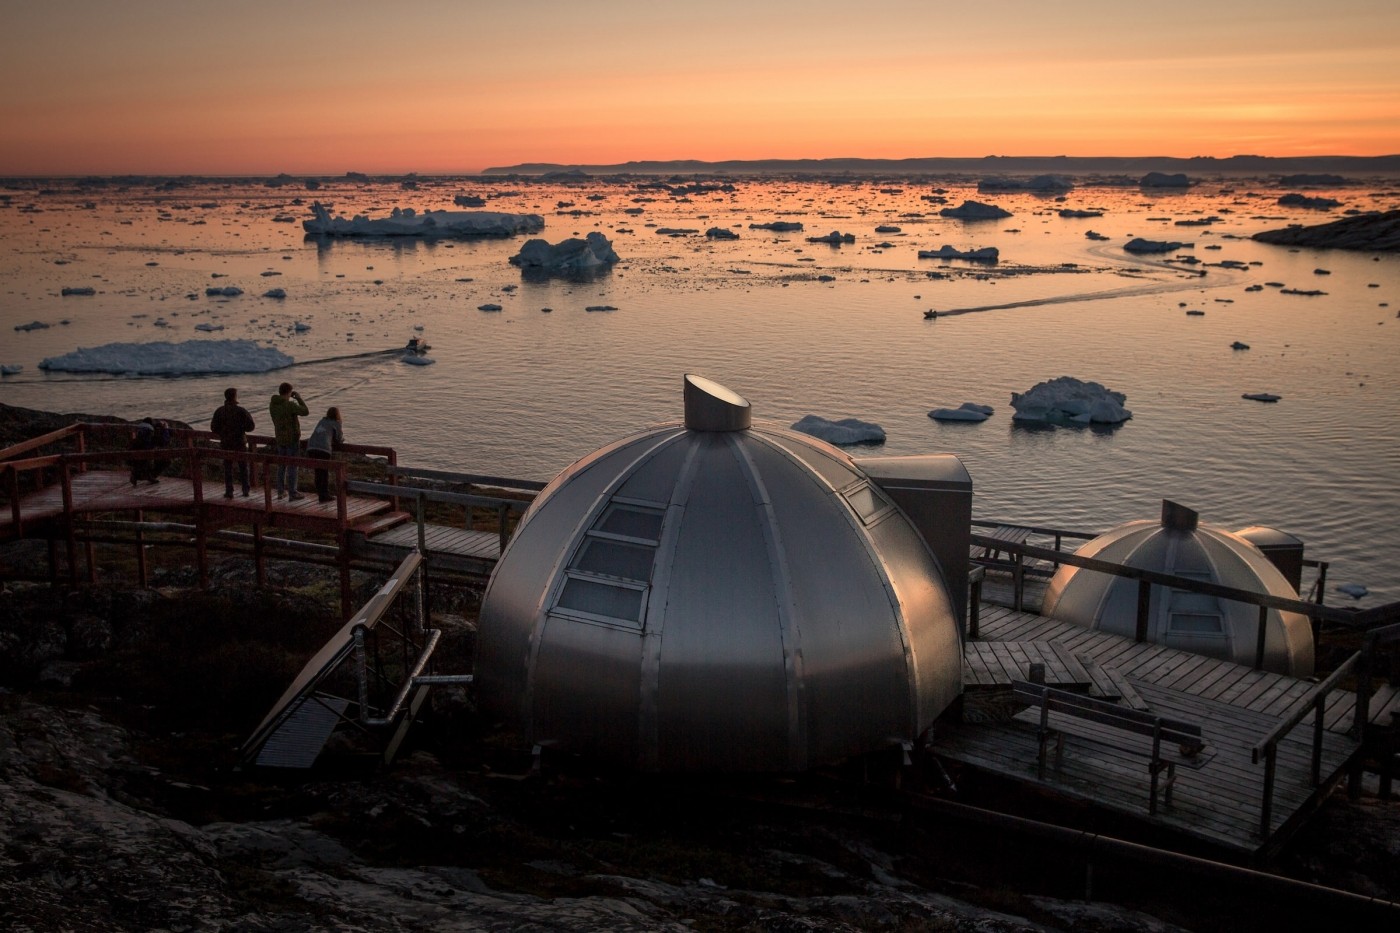 Photographers in the sunset near the Hotel Arctic igloos in Ilulissat in Greenland. Photo by Mads Pihl - Visit Greenland